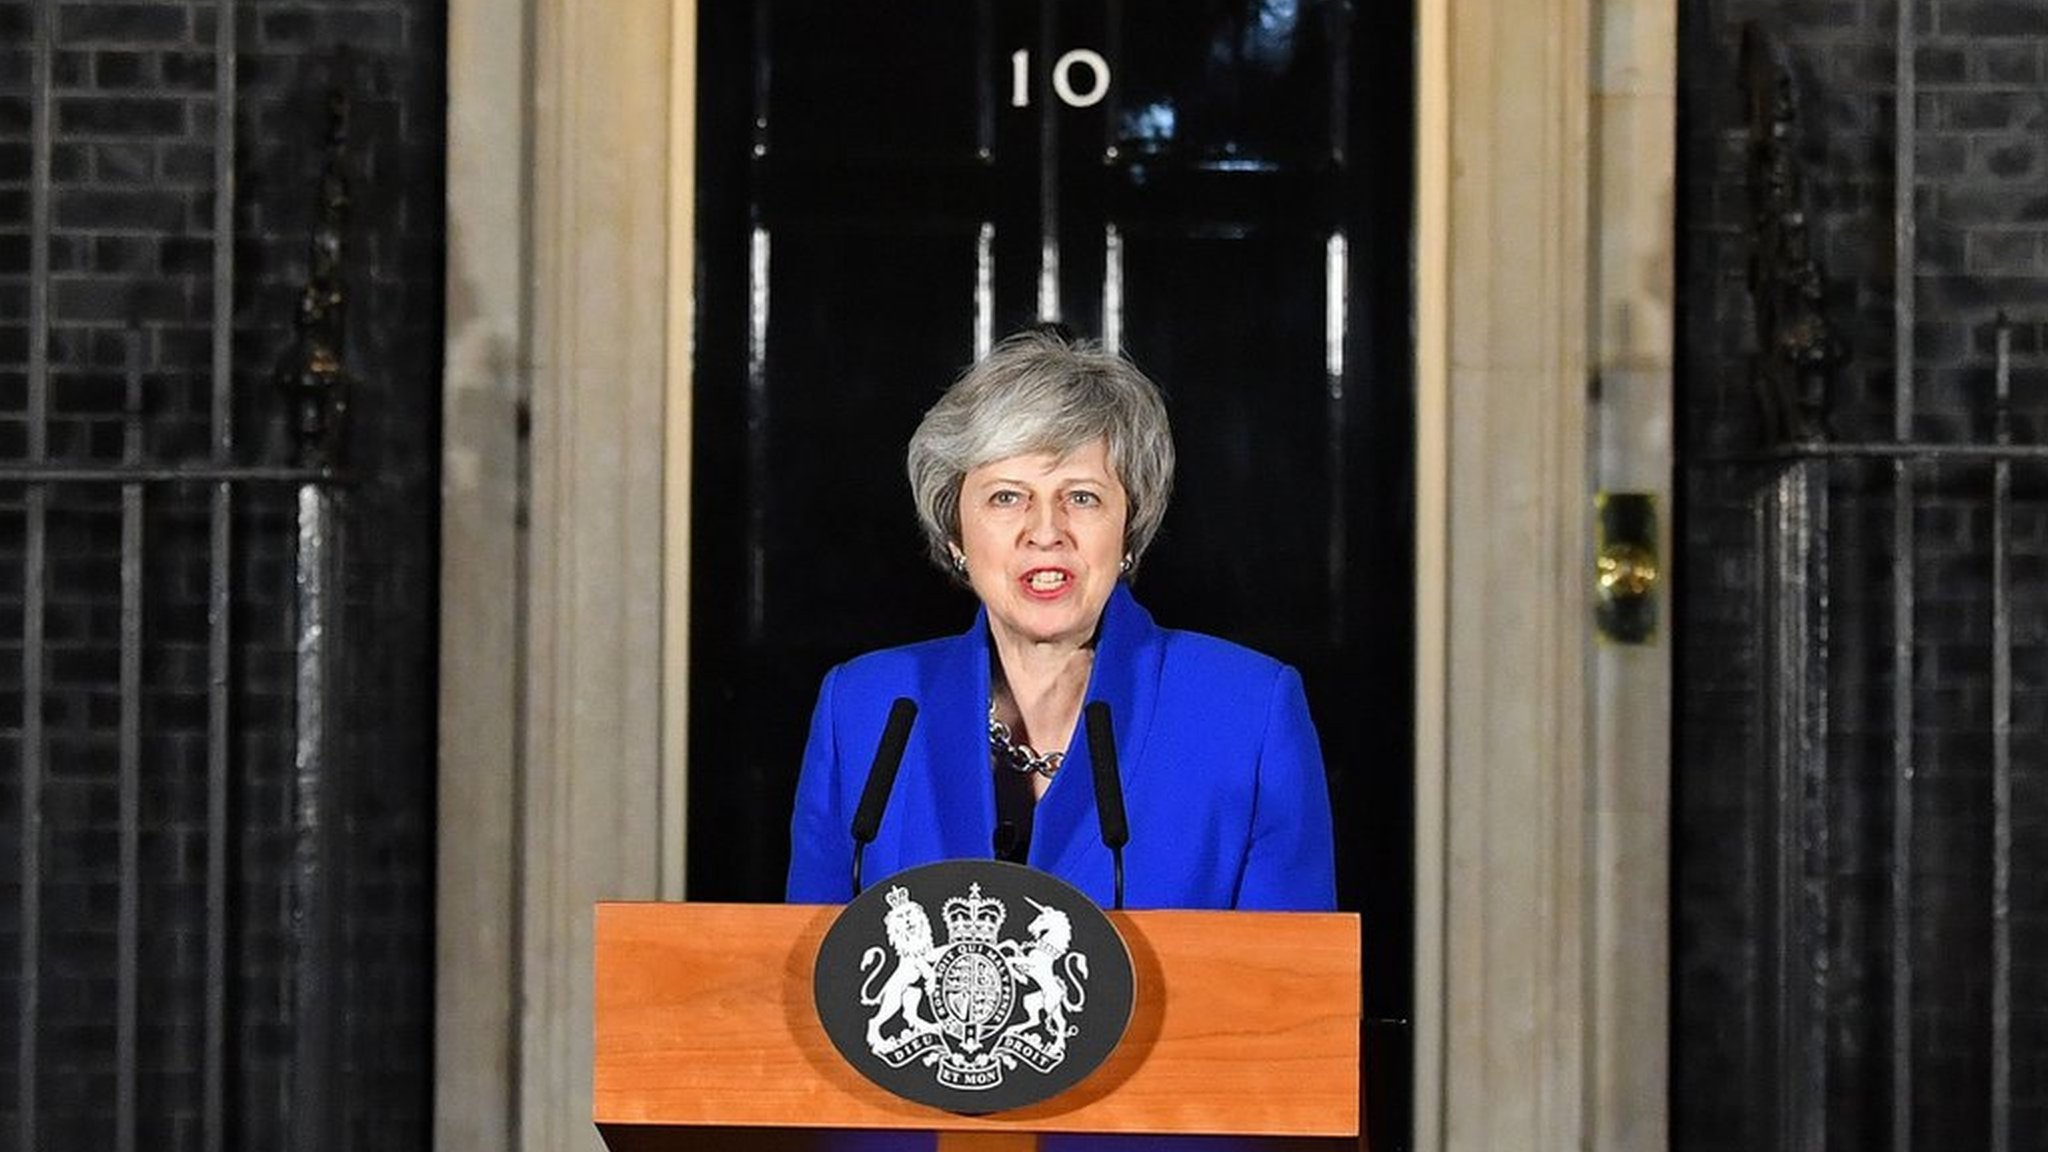 Theresa May The Prime Minister Wins No Confidence Vote And Gets Back To Brexit Discussions 3325